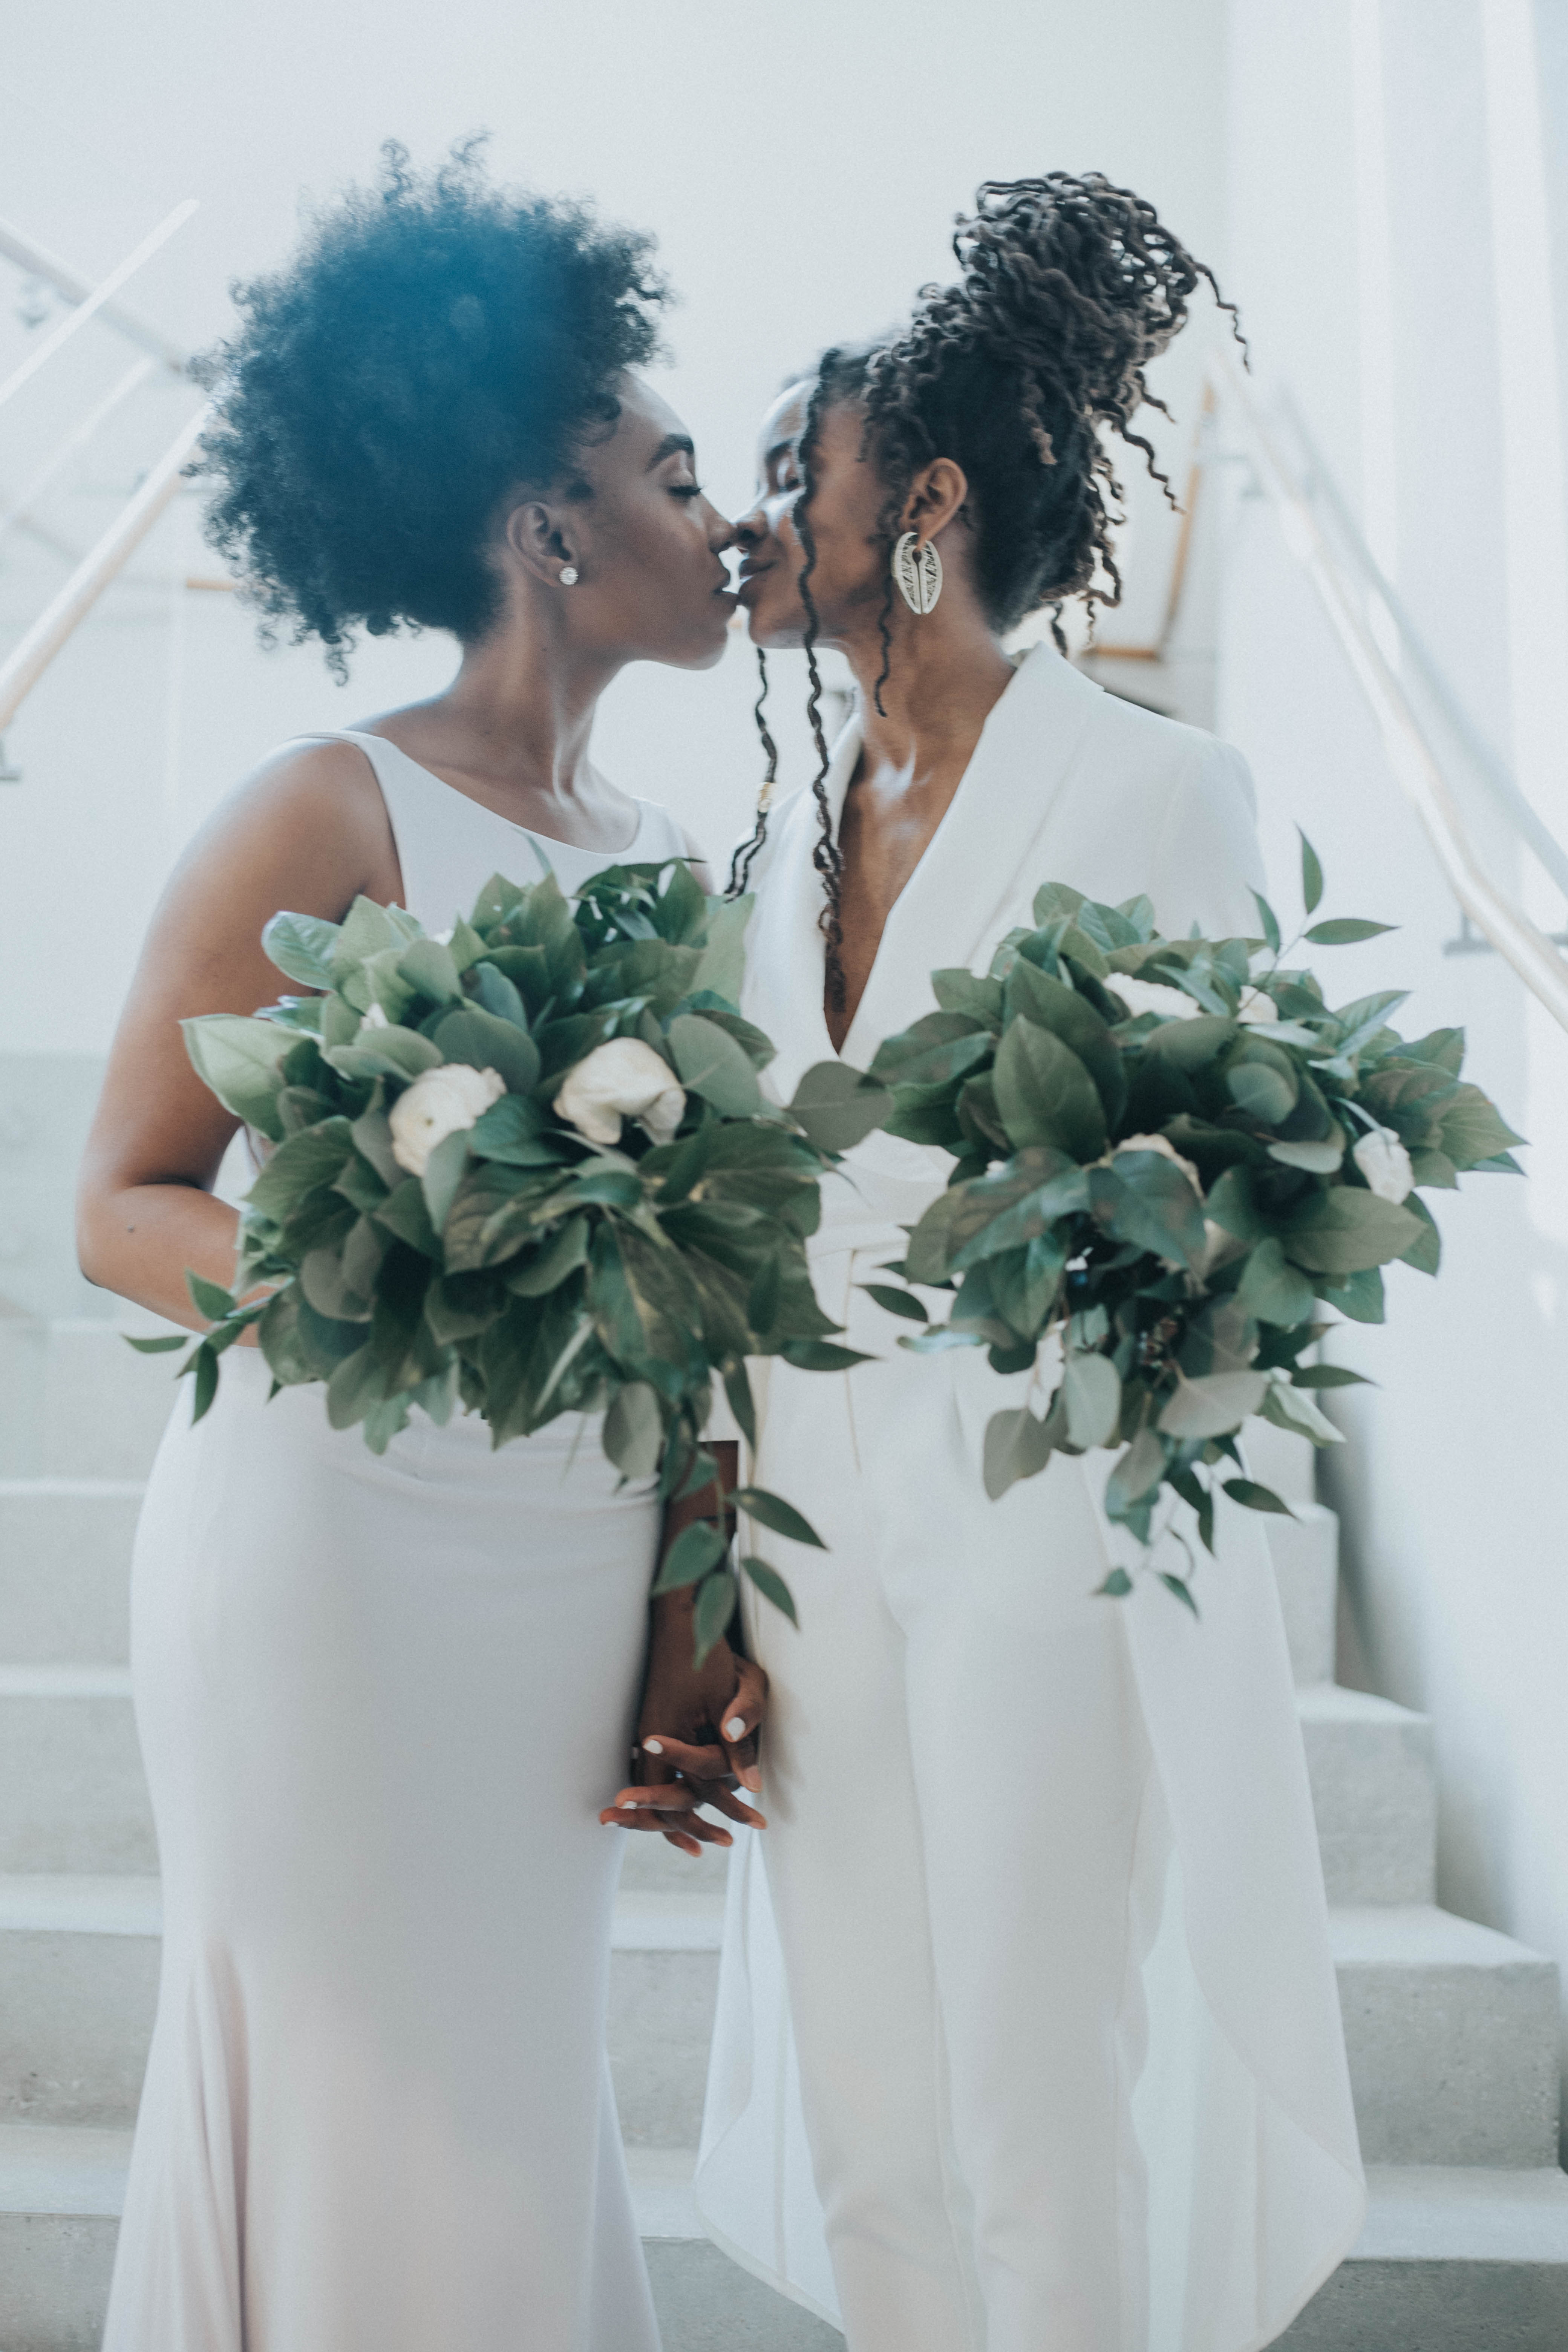 Bridal Bliss: Aww! Stephanie and Javoni’s Feel-Good Wedding Vibes Are Contagious